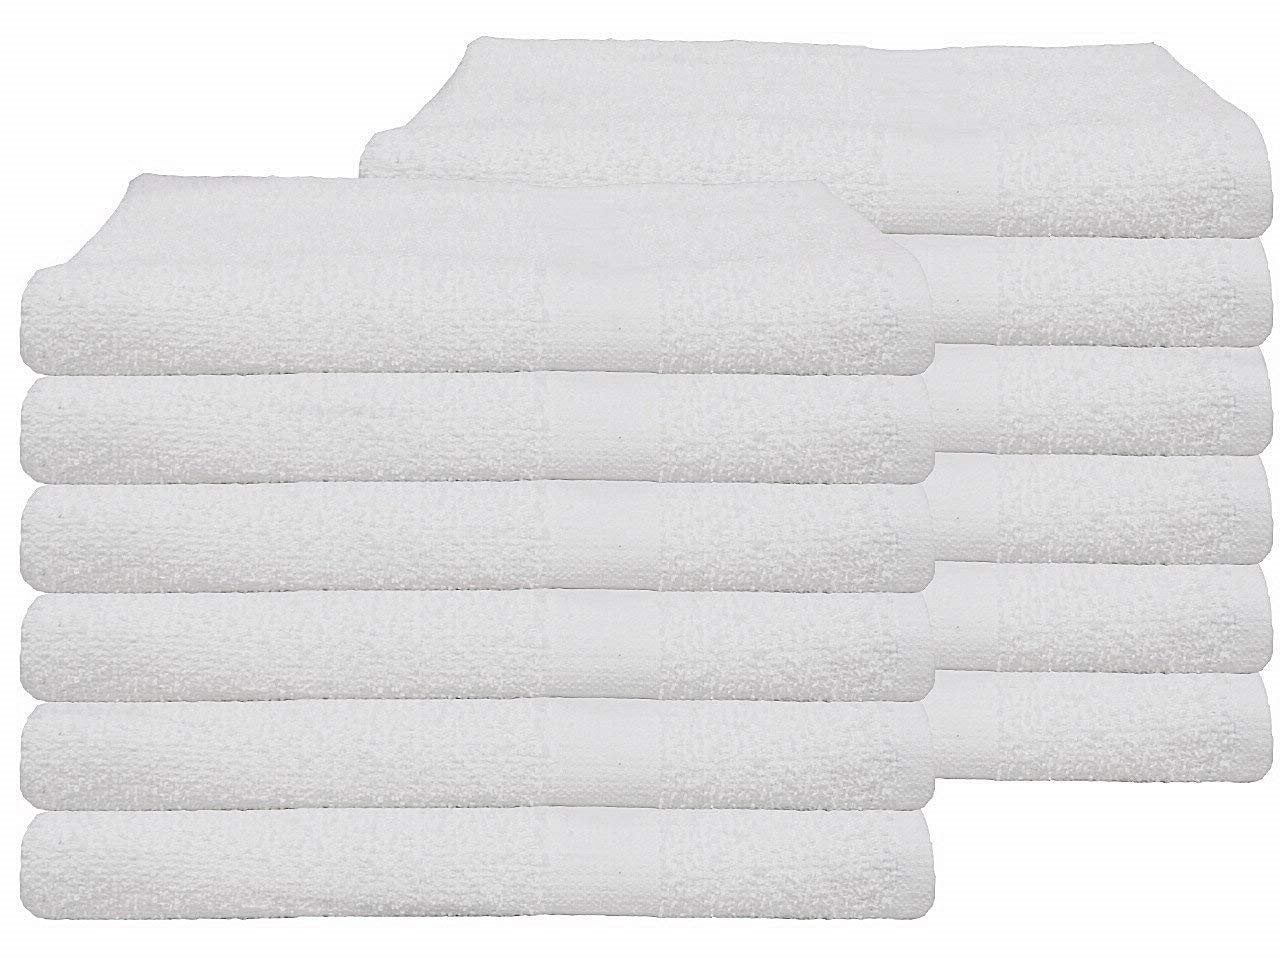 Wholesale Thin White Bath Towels Bulk Buy 100% Cotton 320 gsm Budget Quality Packs of 12, 60, 72 and 720